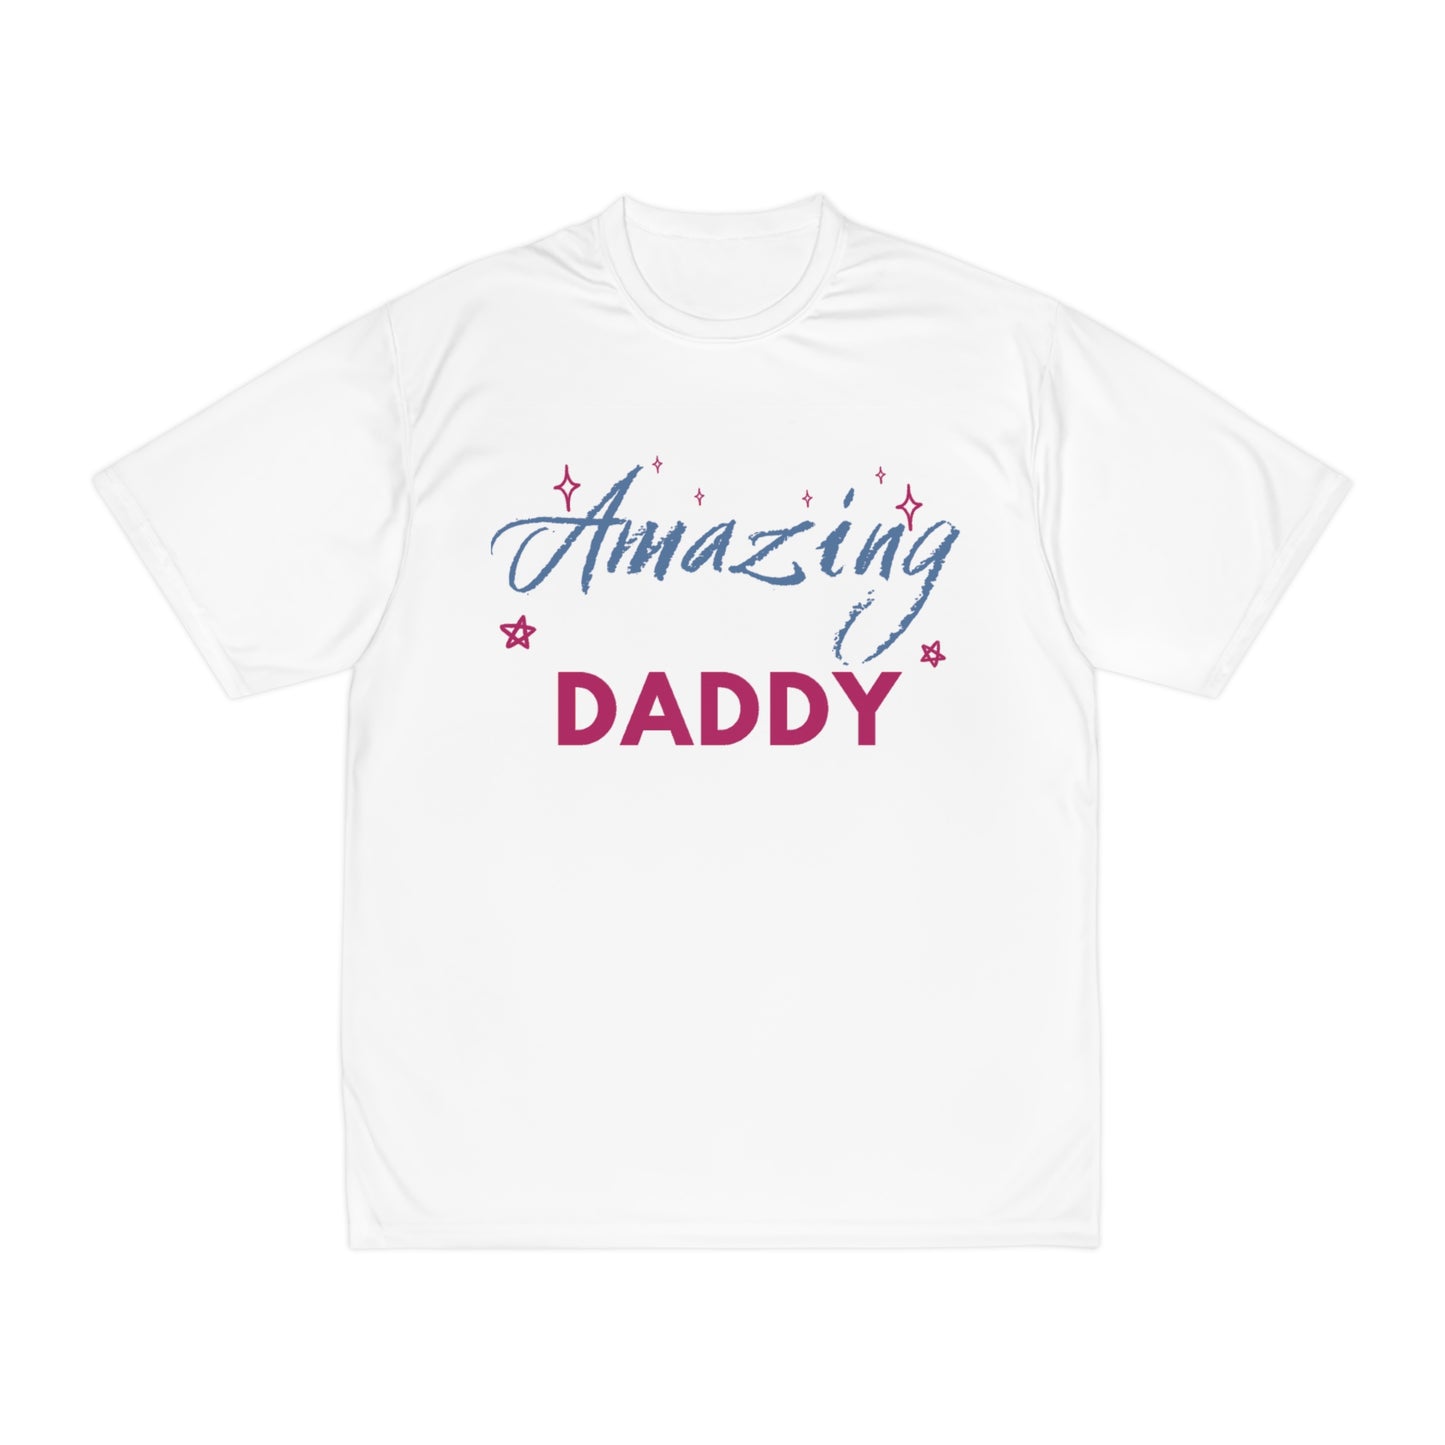 Magical Daddy's Amazing Men's Performance T-Shirt